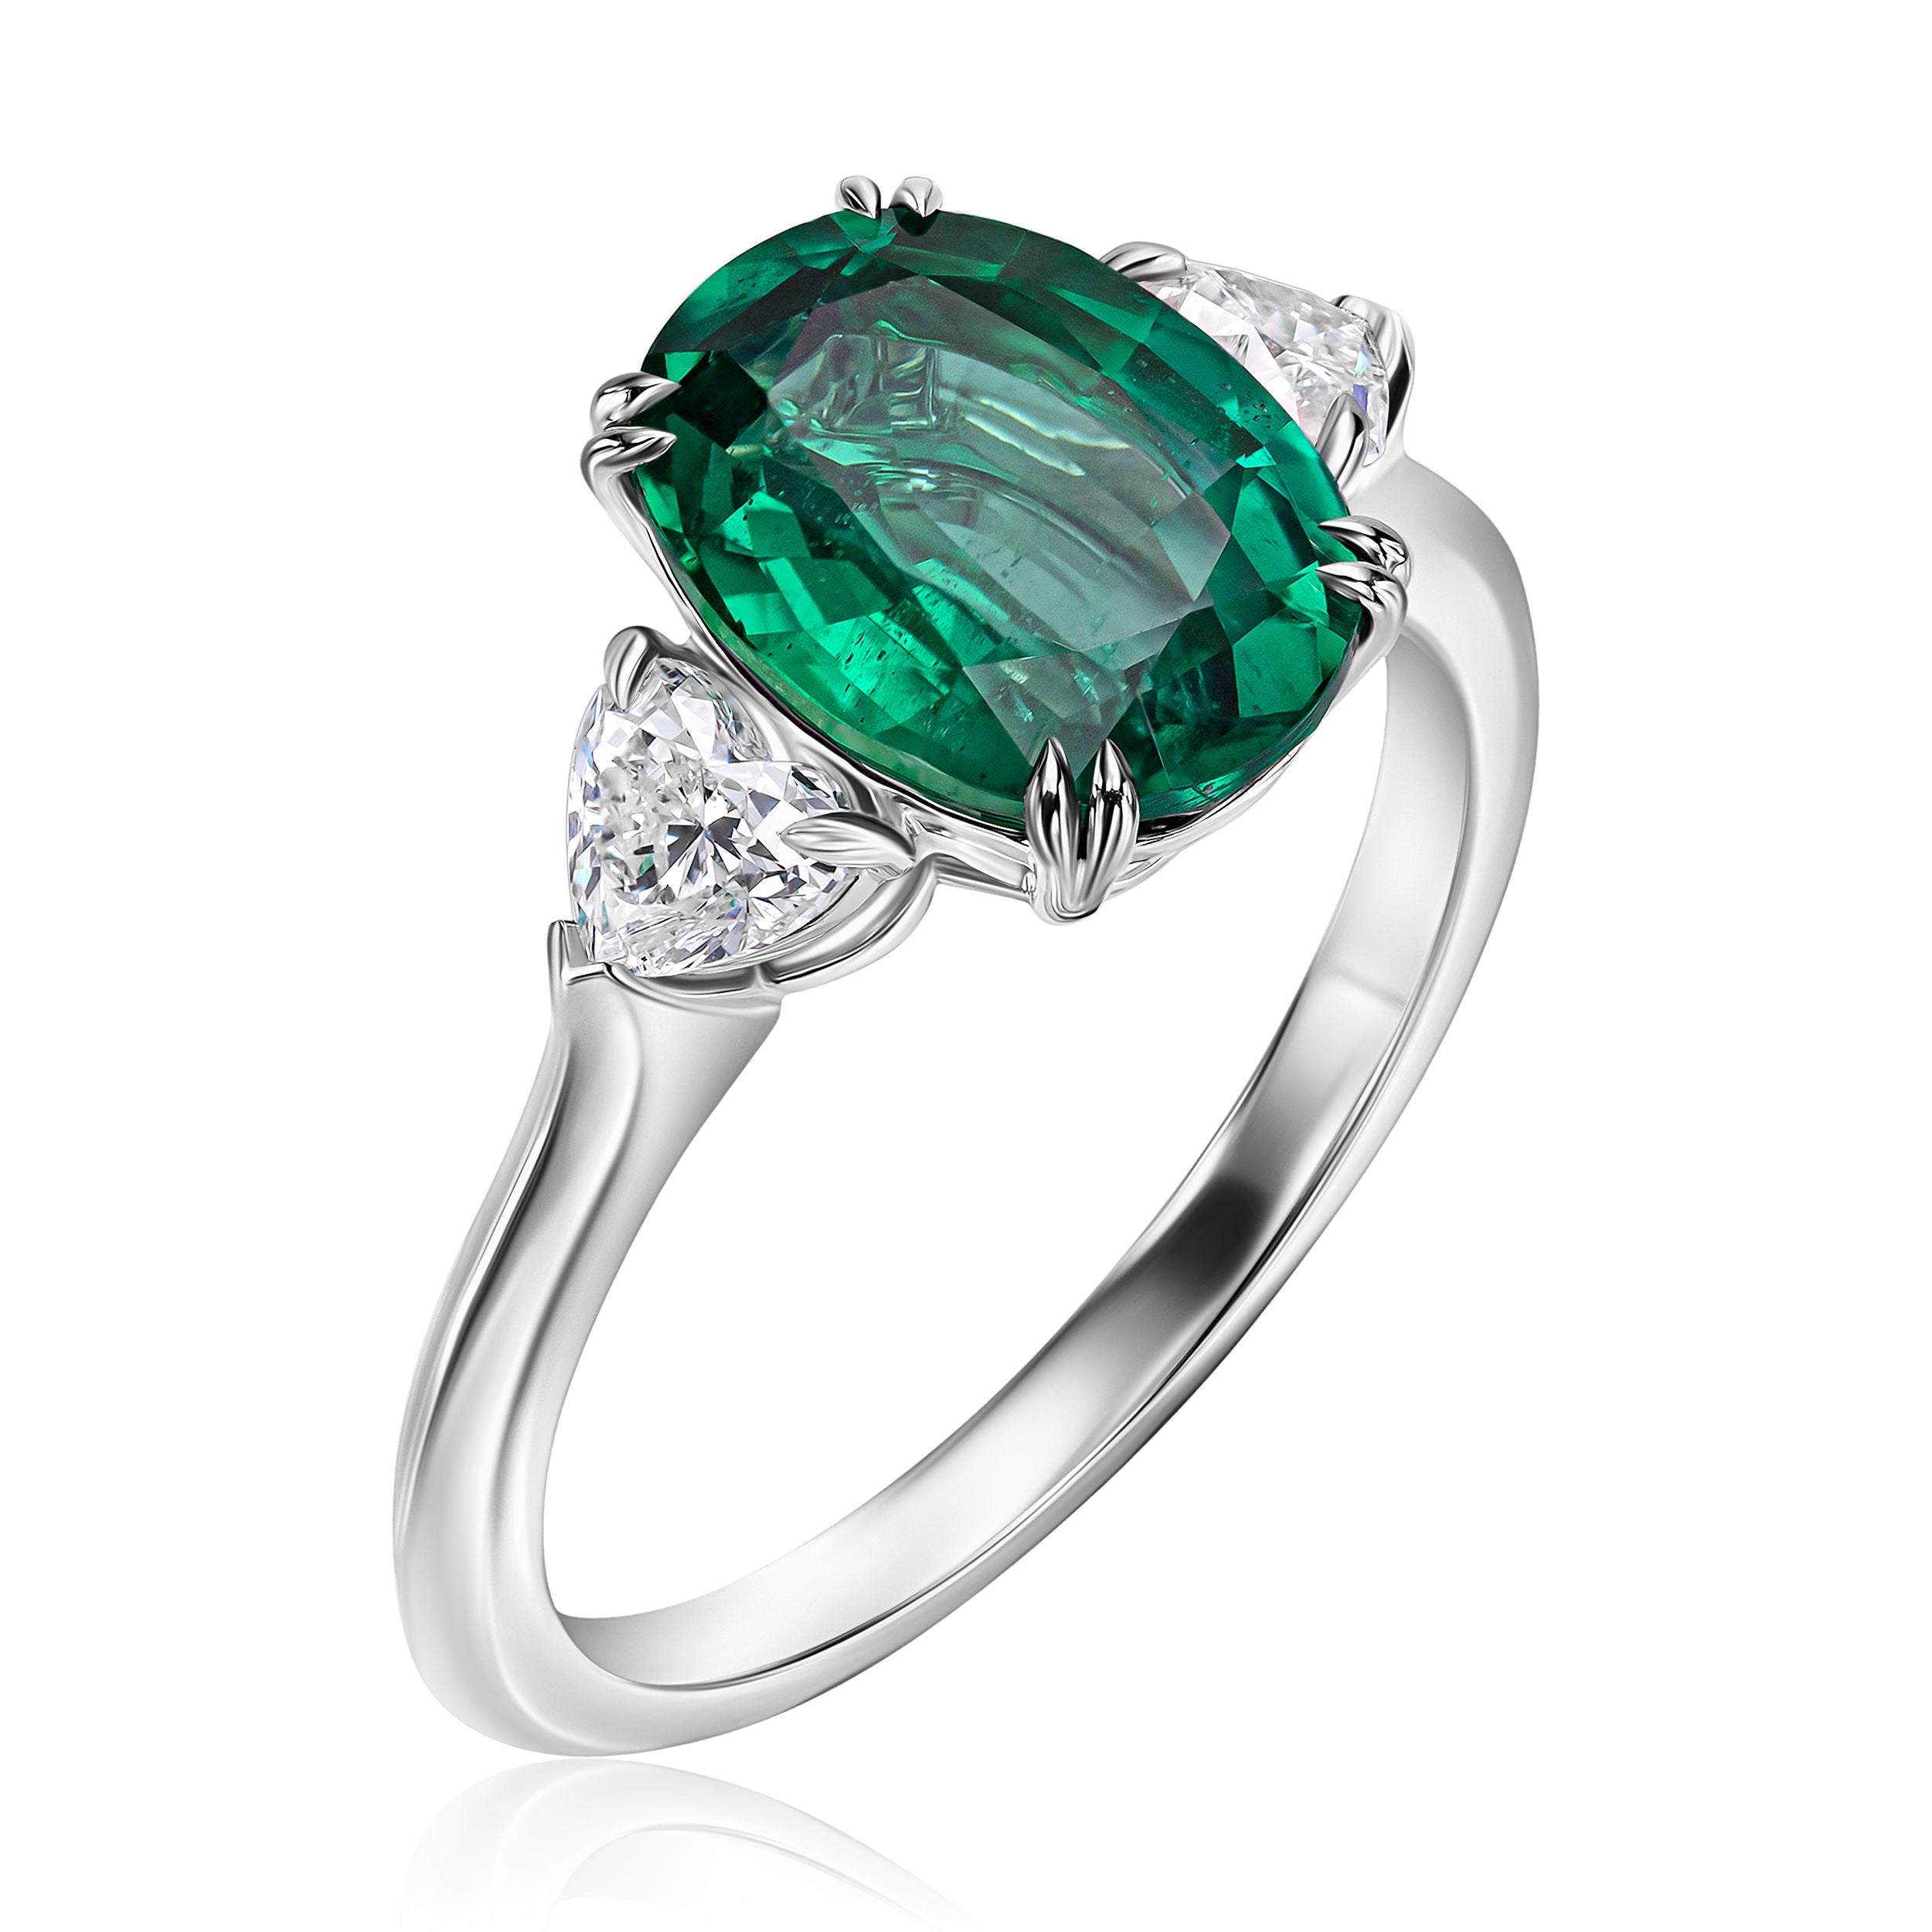 Oval Emerald Ring with Heart Shapes - 3.19ct TW